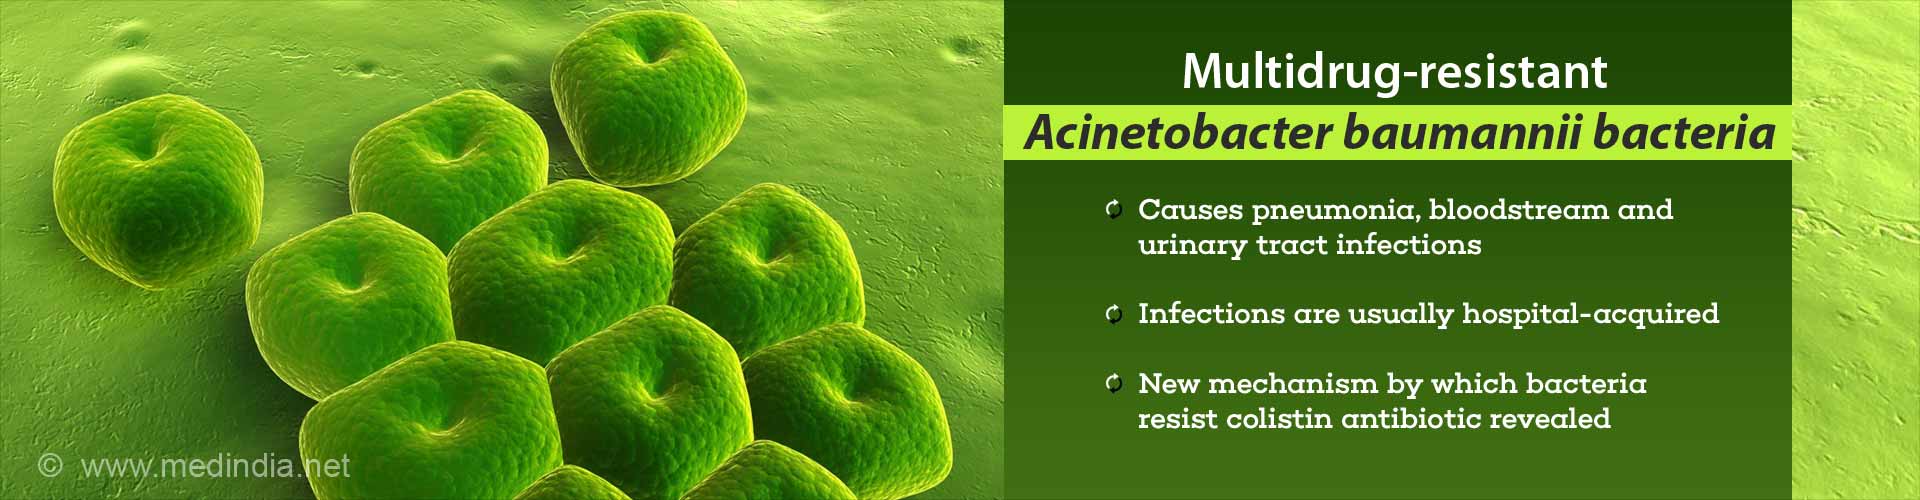 multidrug resistant acinetobacter baunannii bacteria
- causes pneumonia, bloodstream and urinary tract infections
- infections are usually hospital-acquired
- new mechanism by which bacteria resist colistin antibiotic revealed